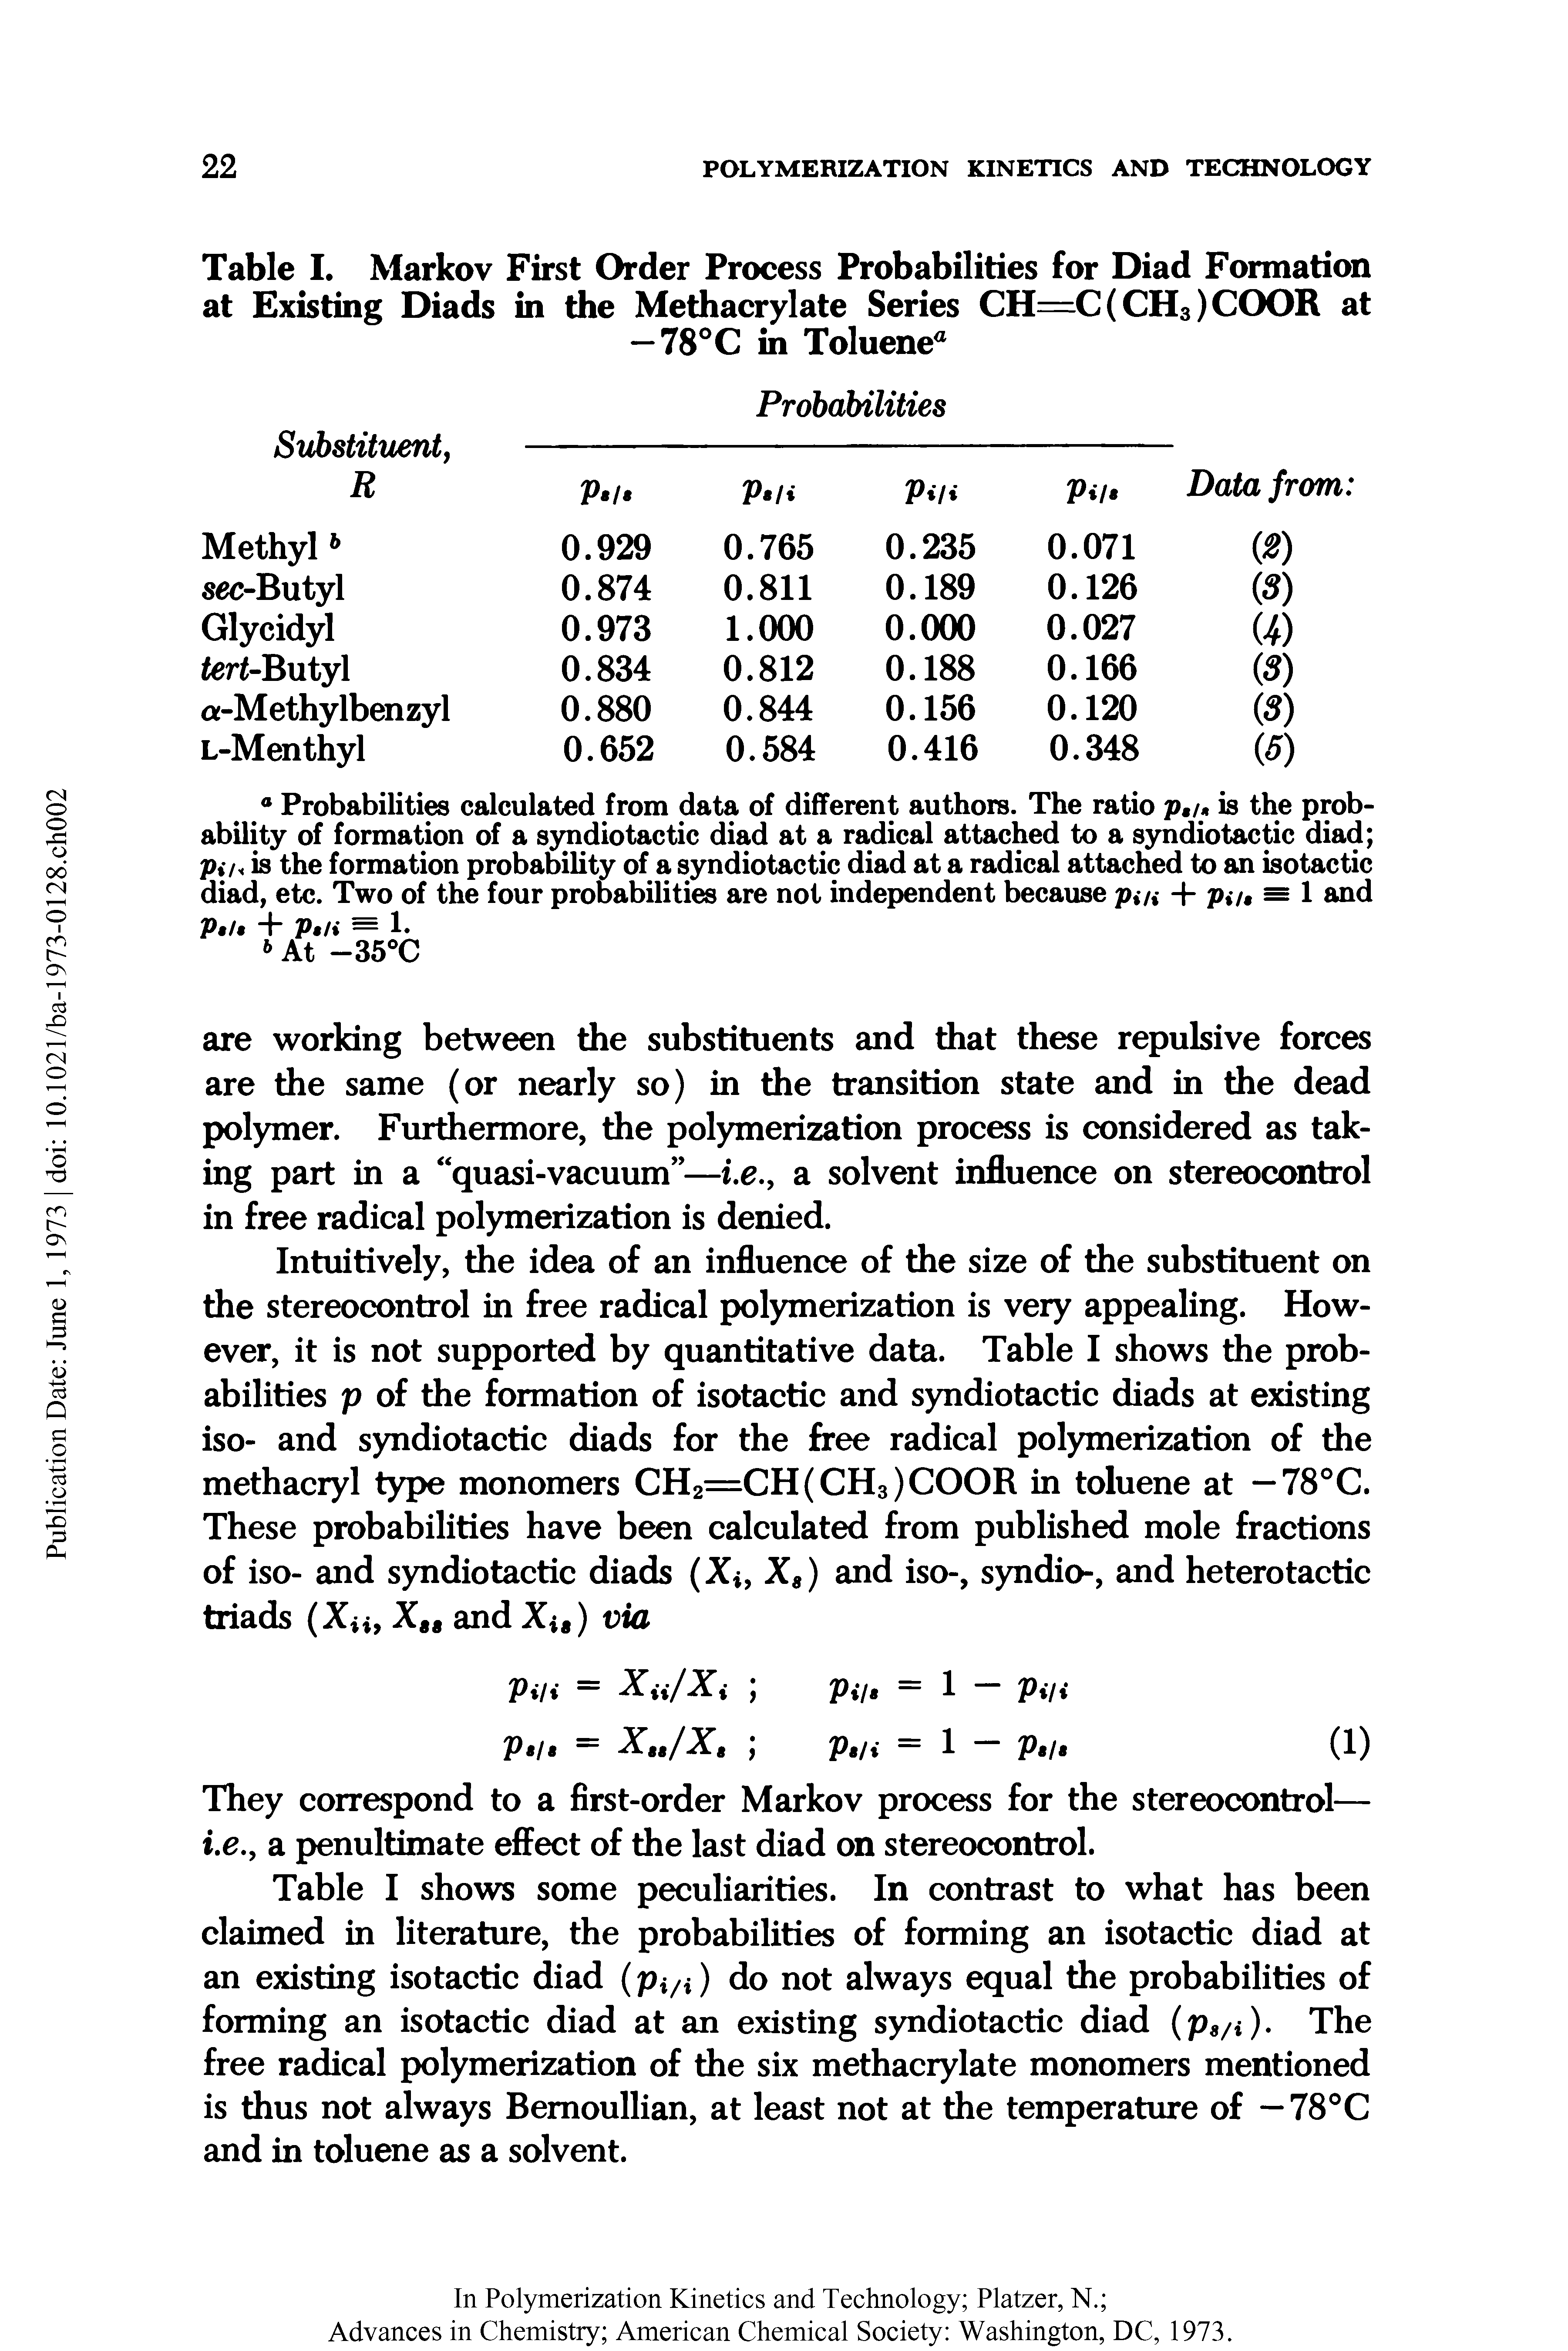 Table I shows some peculiarities. In contrast to what has been claimed in literature, the probabilities of forming an isotactic diad at an existing iso tactic diad (pj/j) do not always equal the probabilities of forming an isotactic diad at an existing syndiotactic diad (p8/i). The free radical polymerization of the six methacrylate monomers mentioned is thus not always Bemoullian, at least not at the temperature of — 78°C and in toluene as a solvent.